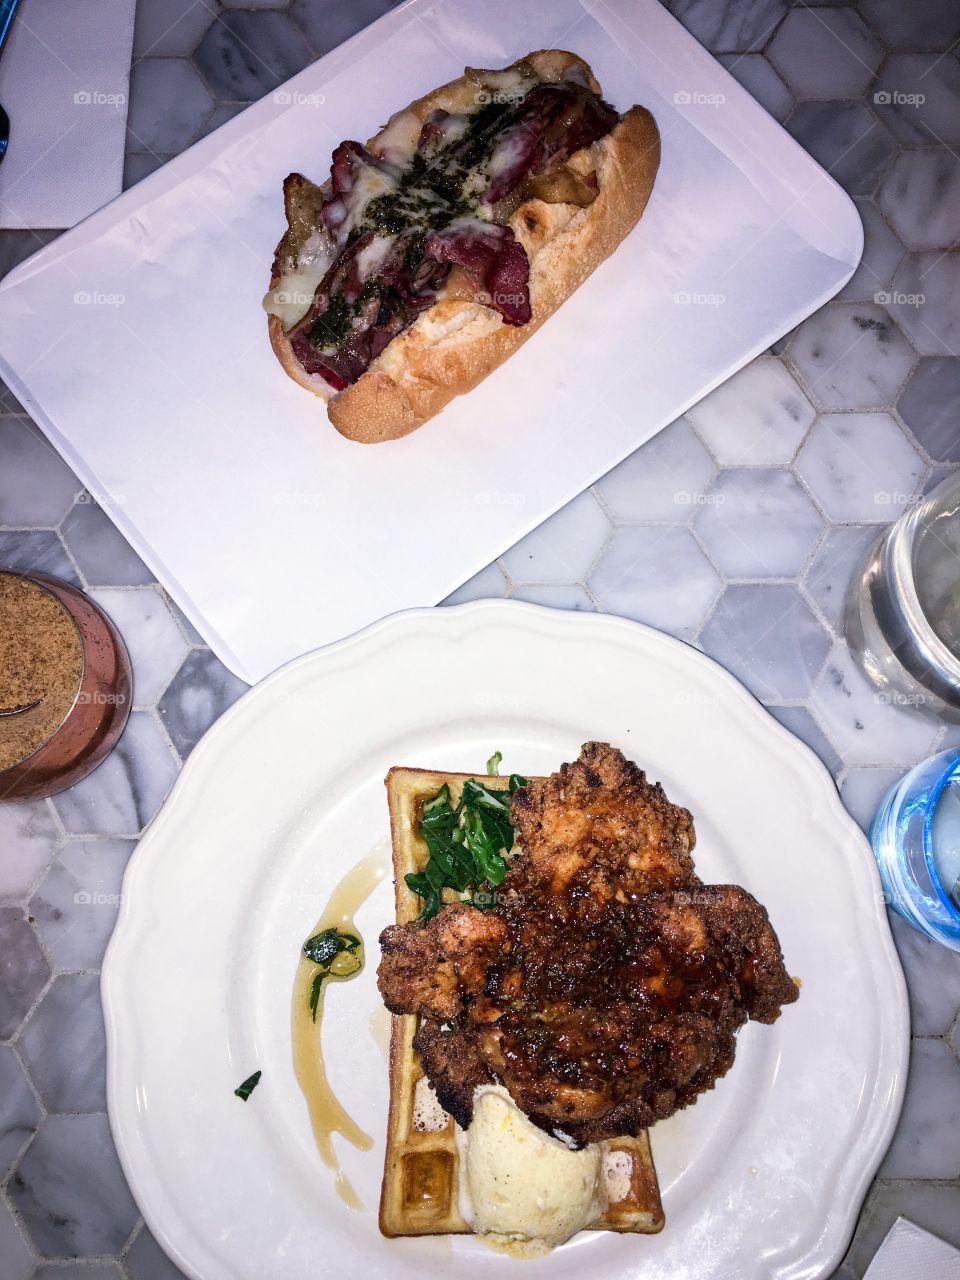 Fried chicken waffles and Philly cheese steak 